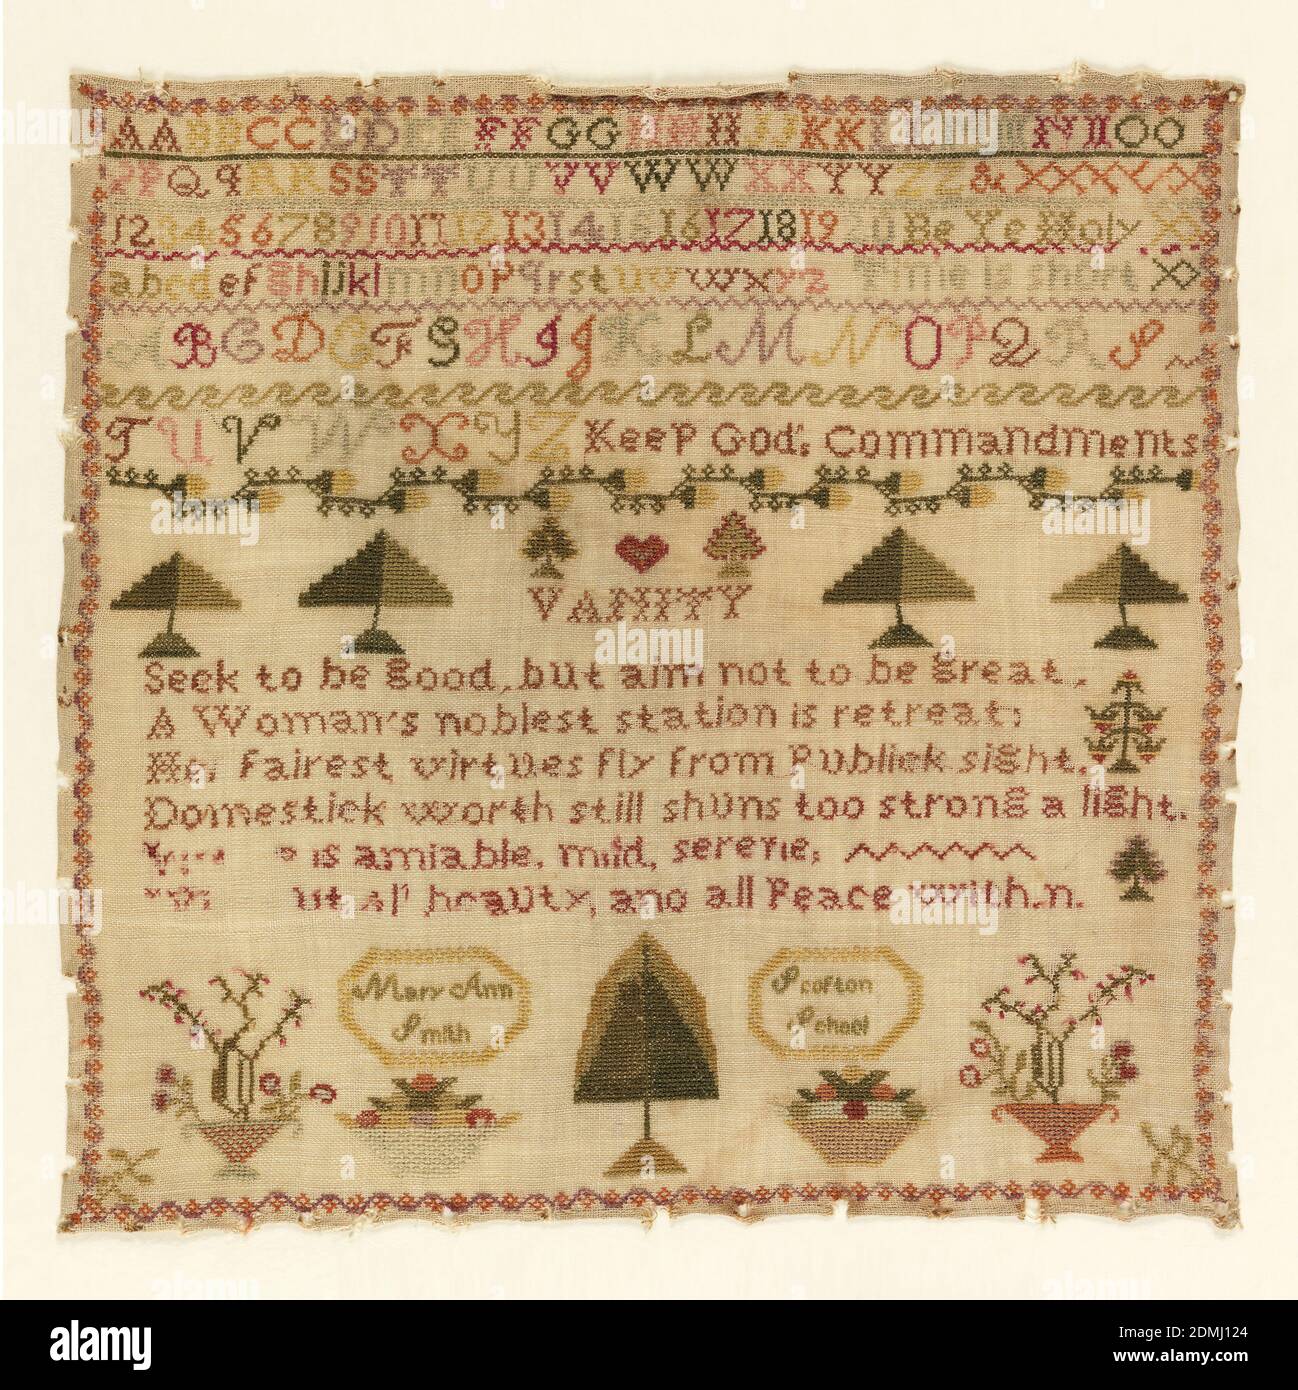 Sampler, Mary Ann Smith, American, Medium: wool embroidery on linen foundation Technique: embroidered on plain weave foundation Label: linen embroidered with wool, Several rows of alphabets and numerals, followed by a row of trees, and a verse:, Vanity, Seek to be good, but aim not to be great, A woman's noblest station is retreat, Her fairest virtues fly from publick sight, Domestick worth still shuns too strong a light, Woman (?) is amiable, mild, serene, (?) all beauty and peace within, At the bottom, baskets of fruit and flowers, and two medallions, one inscribed Mary Ann Smith Stock Photo